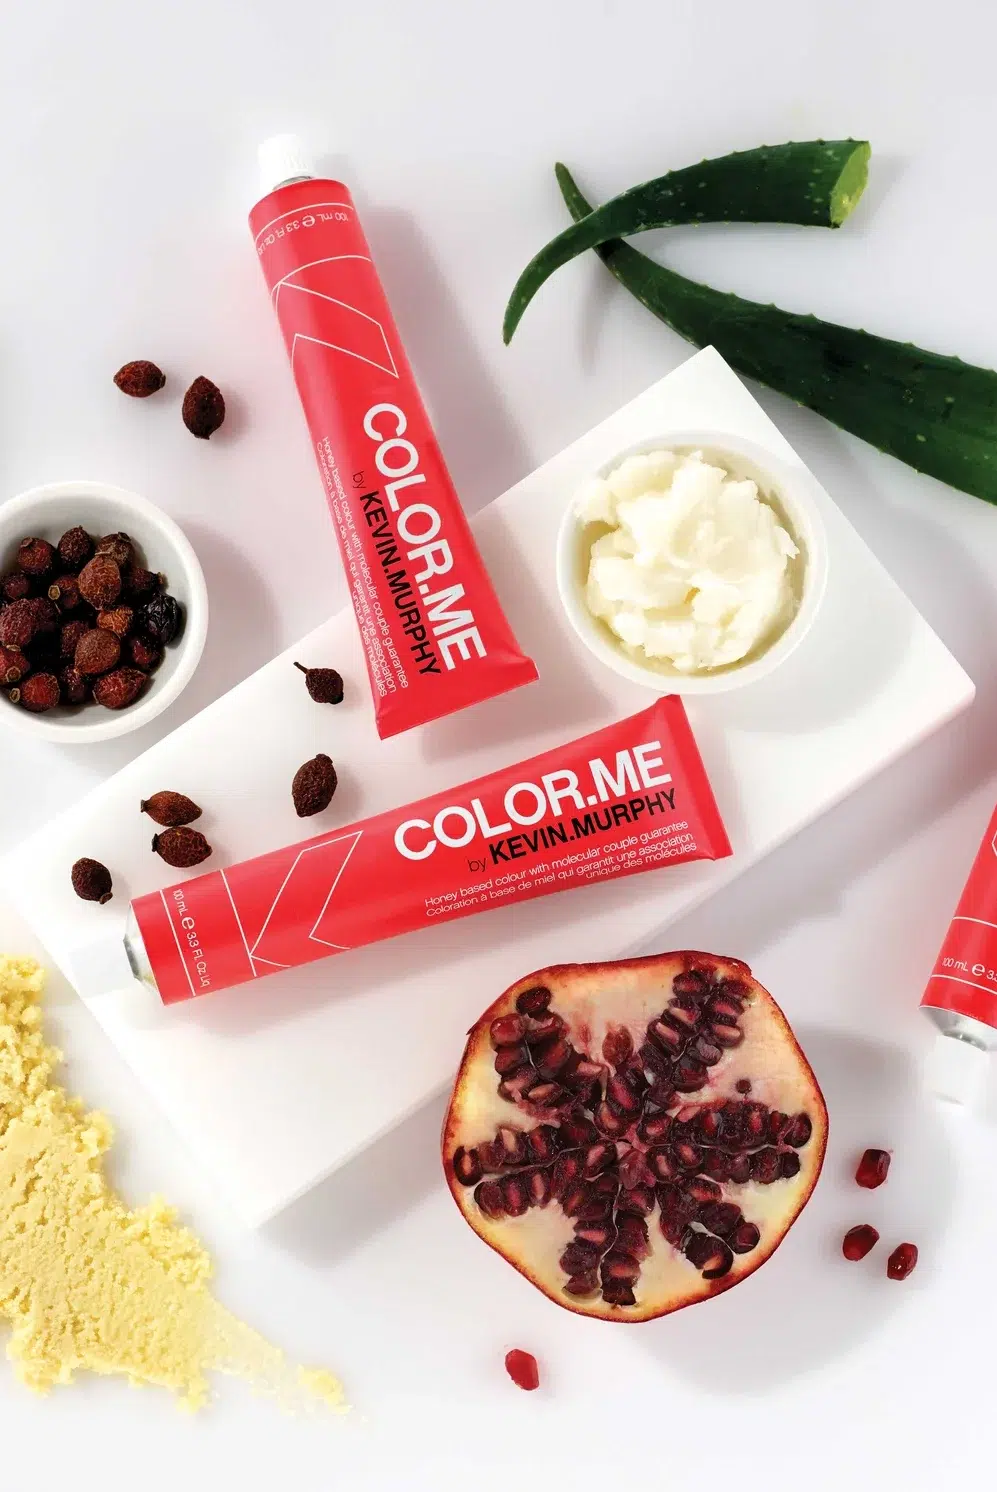 red tubes of color.me by kevin murphy hair color surrounded by natural ingredients